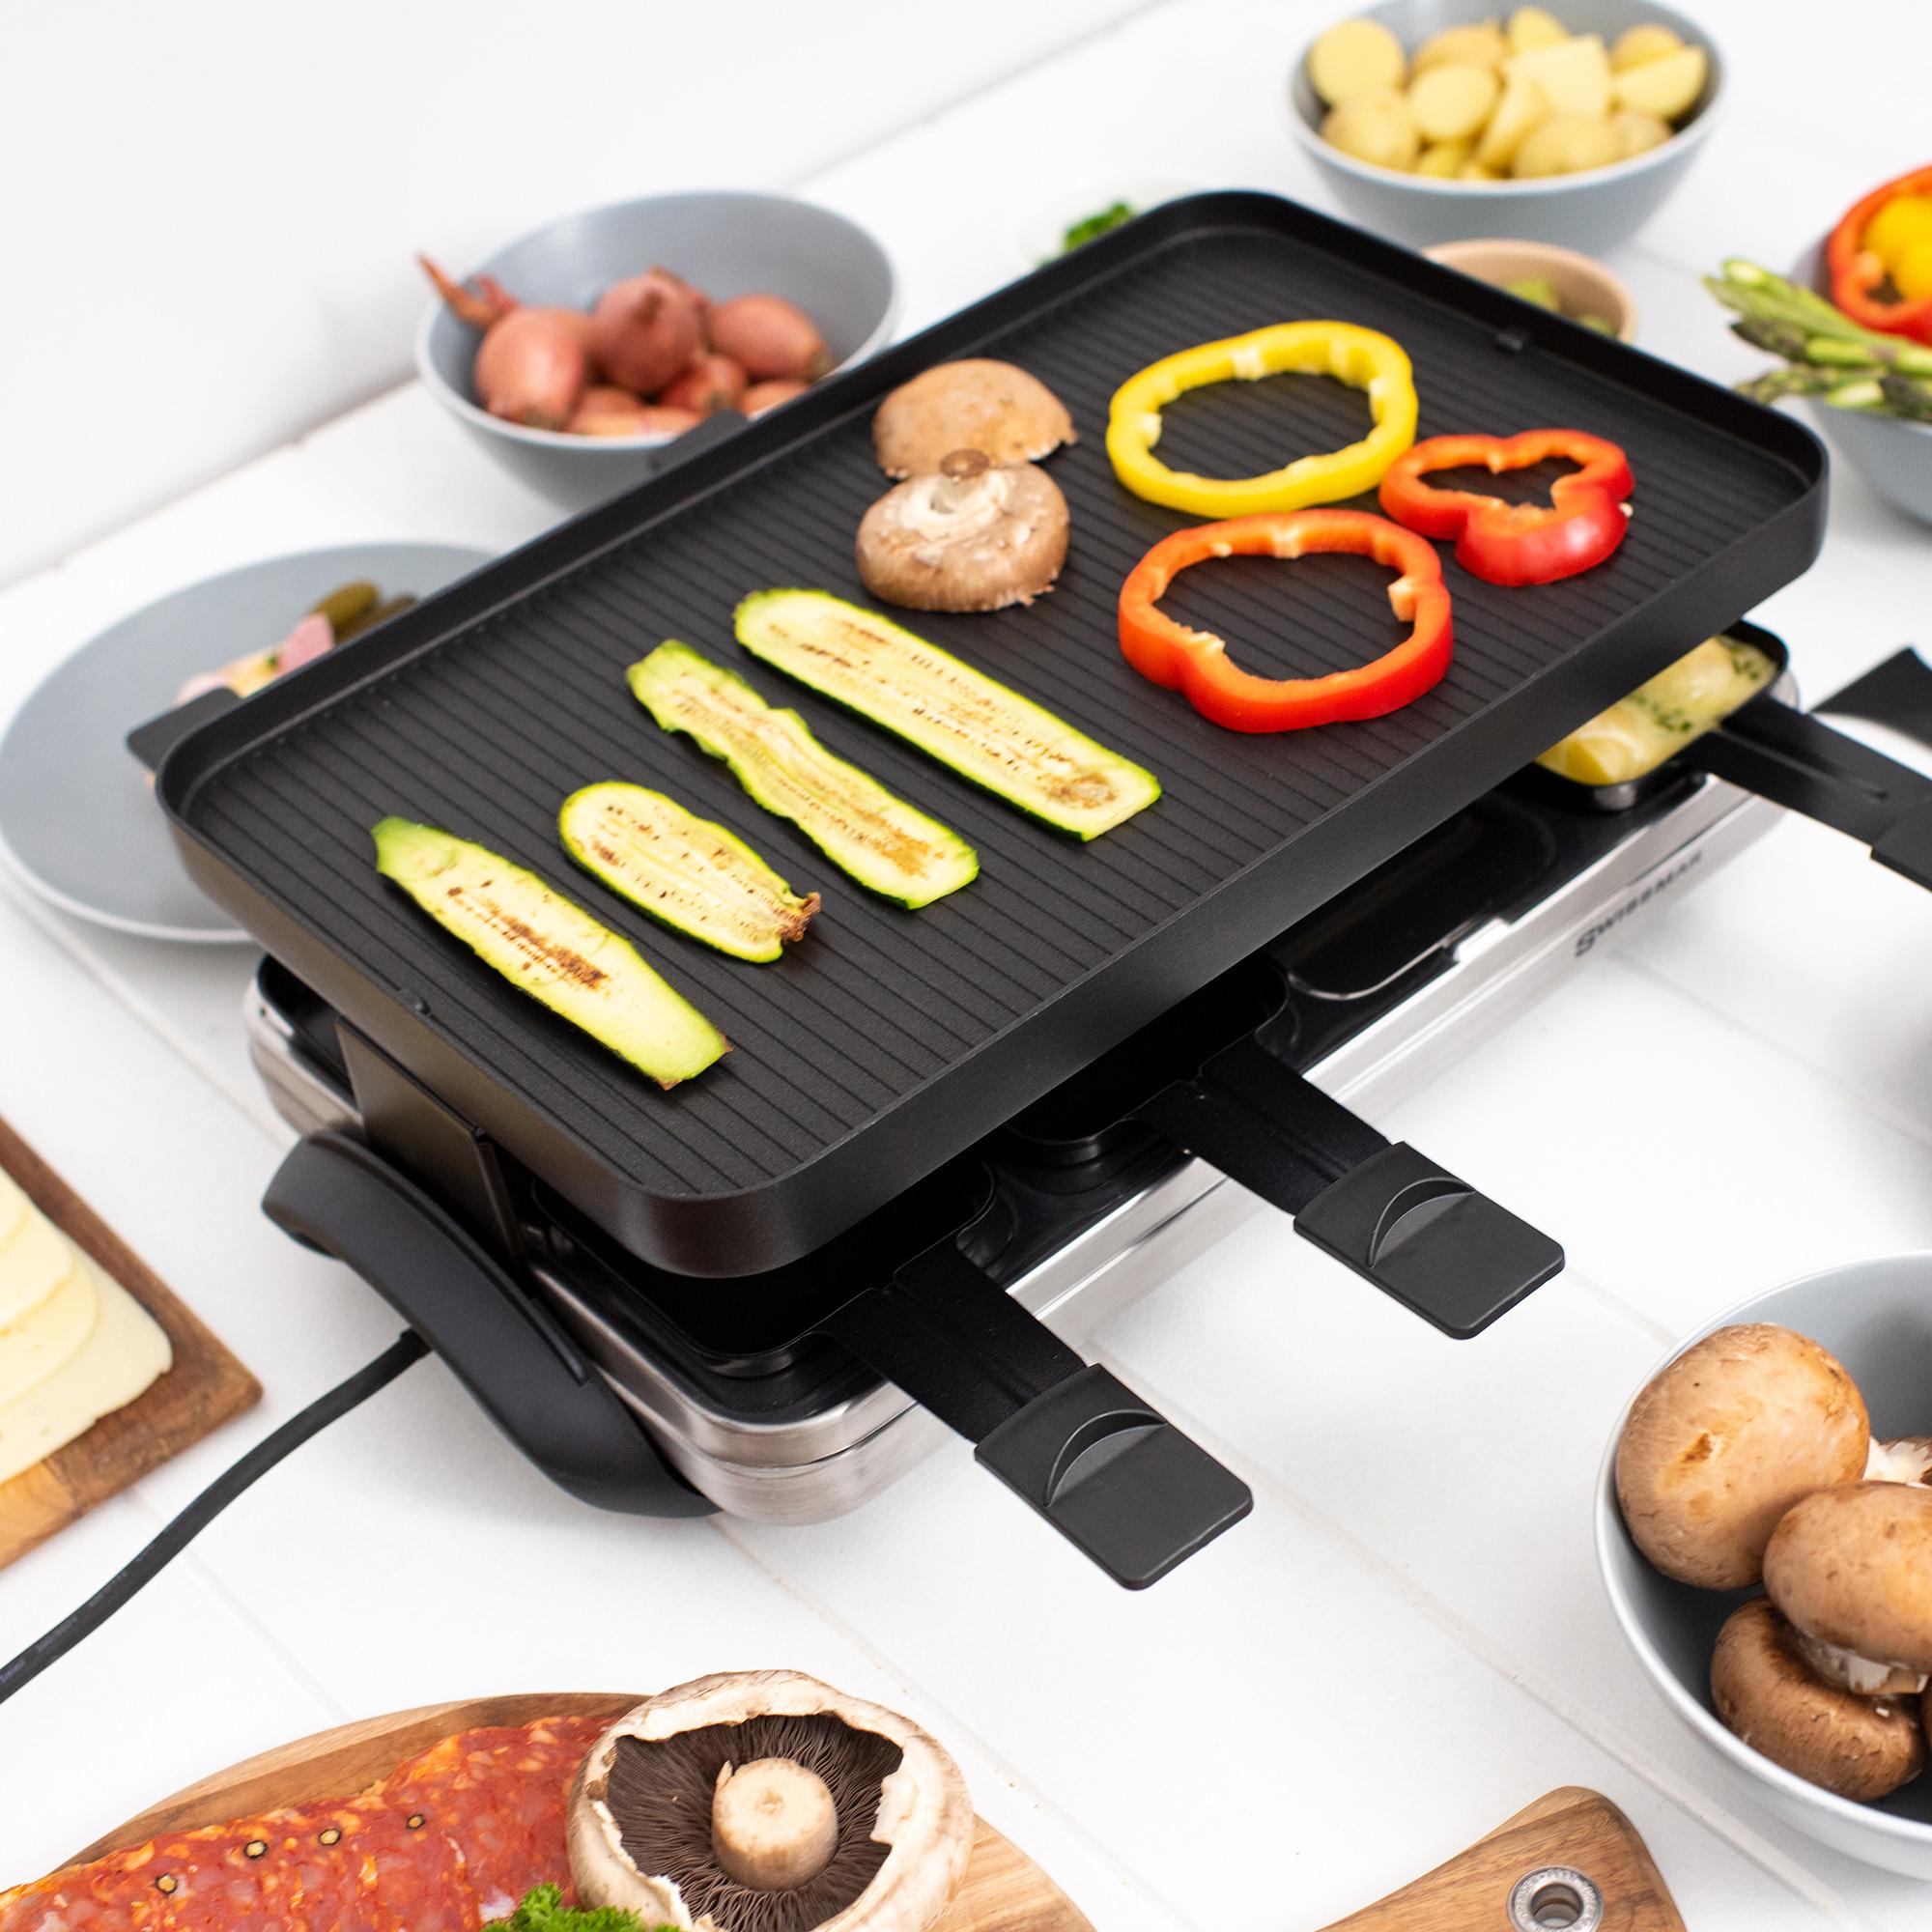 Swissmar Valais 8 Person Raclette Party Grill Stainless Steel Image 3